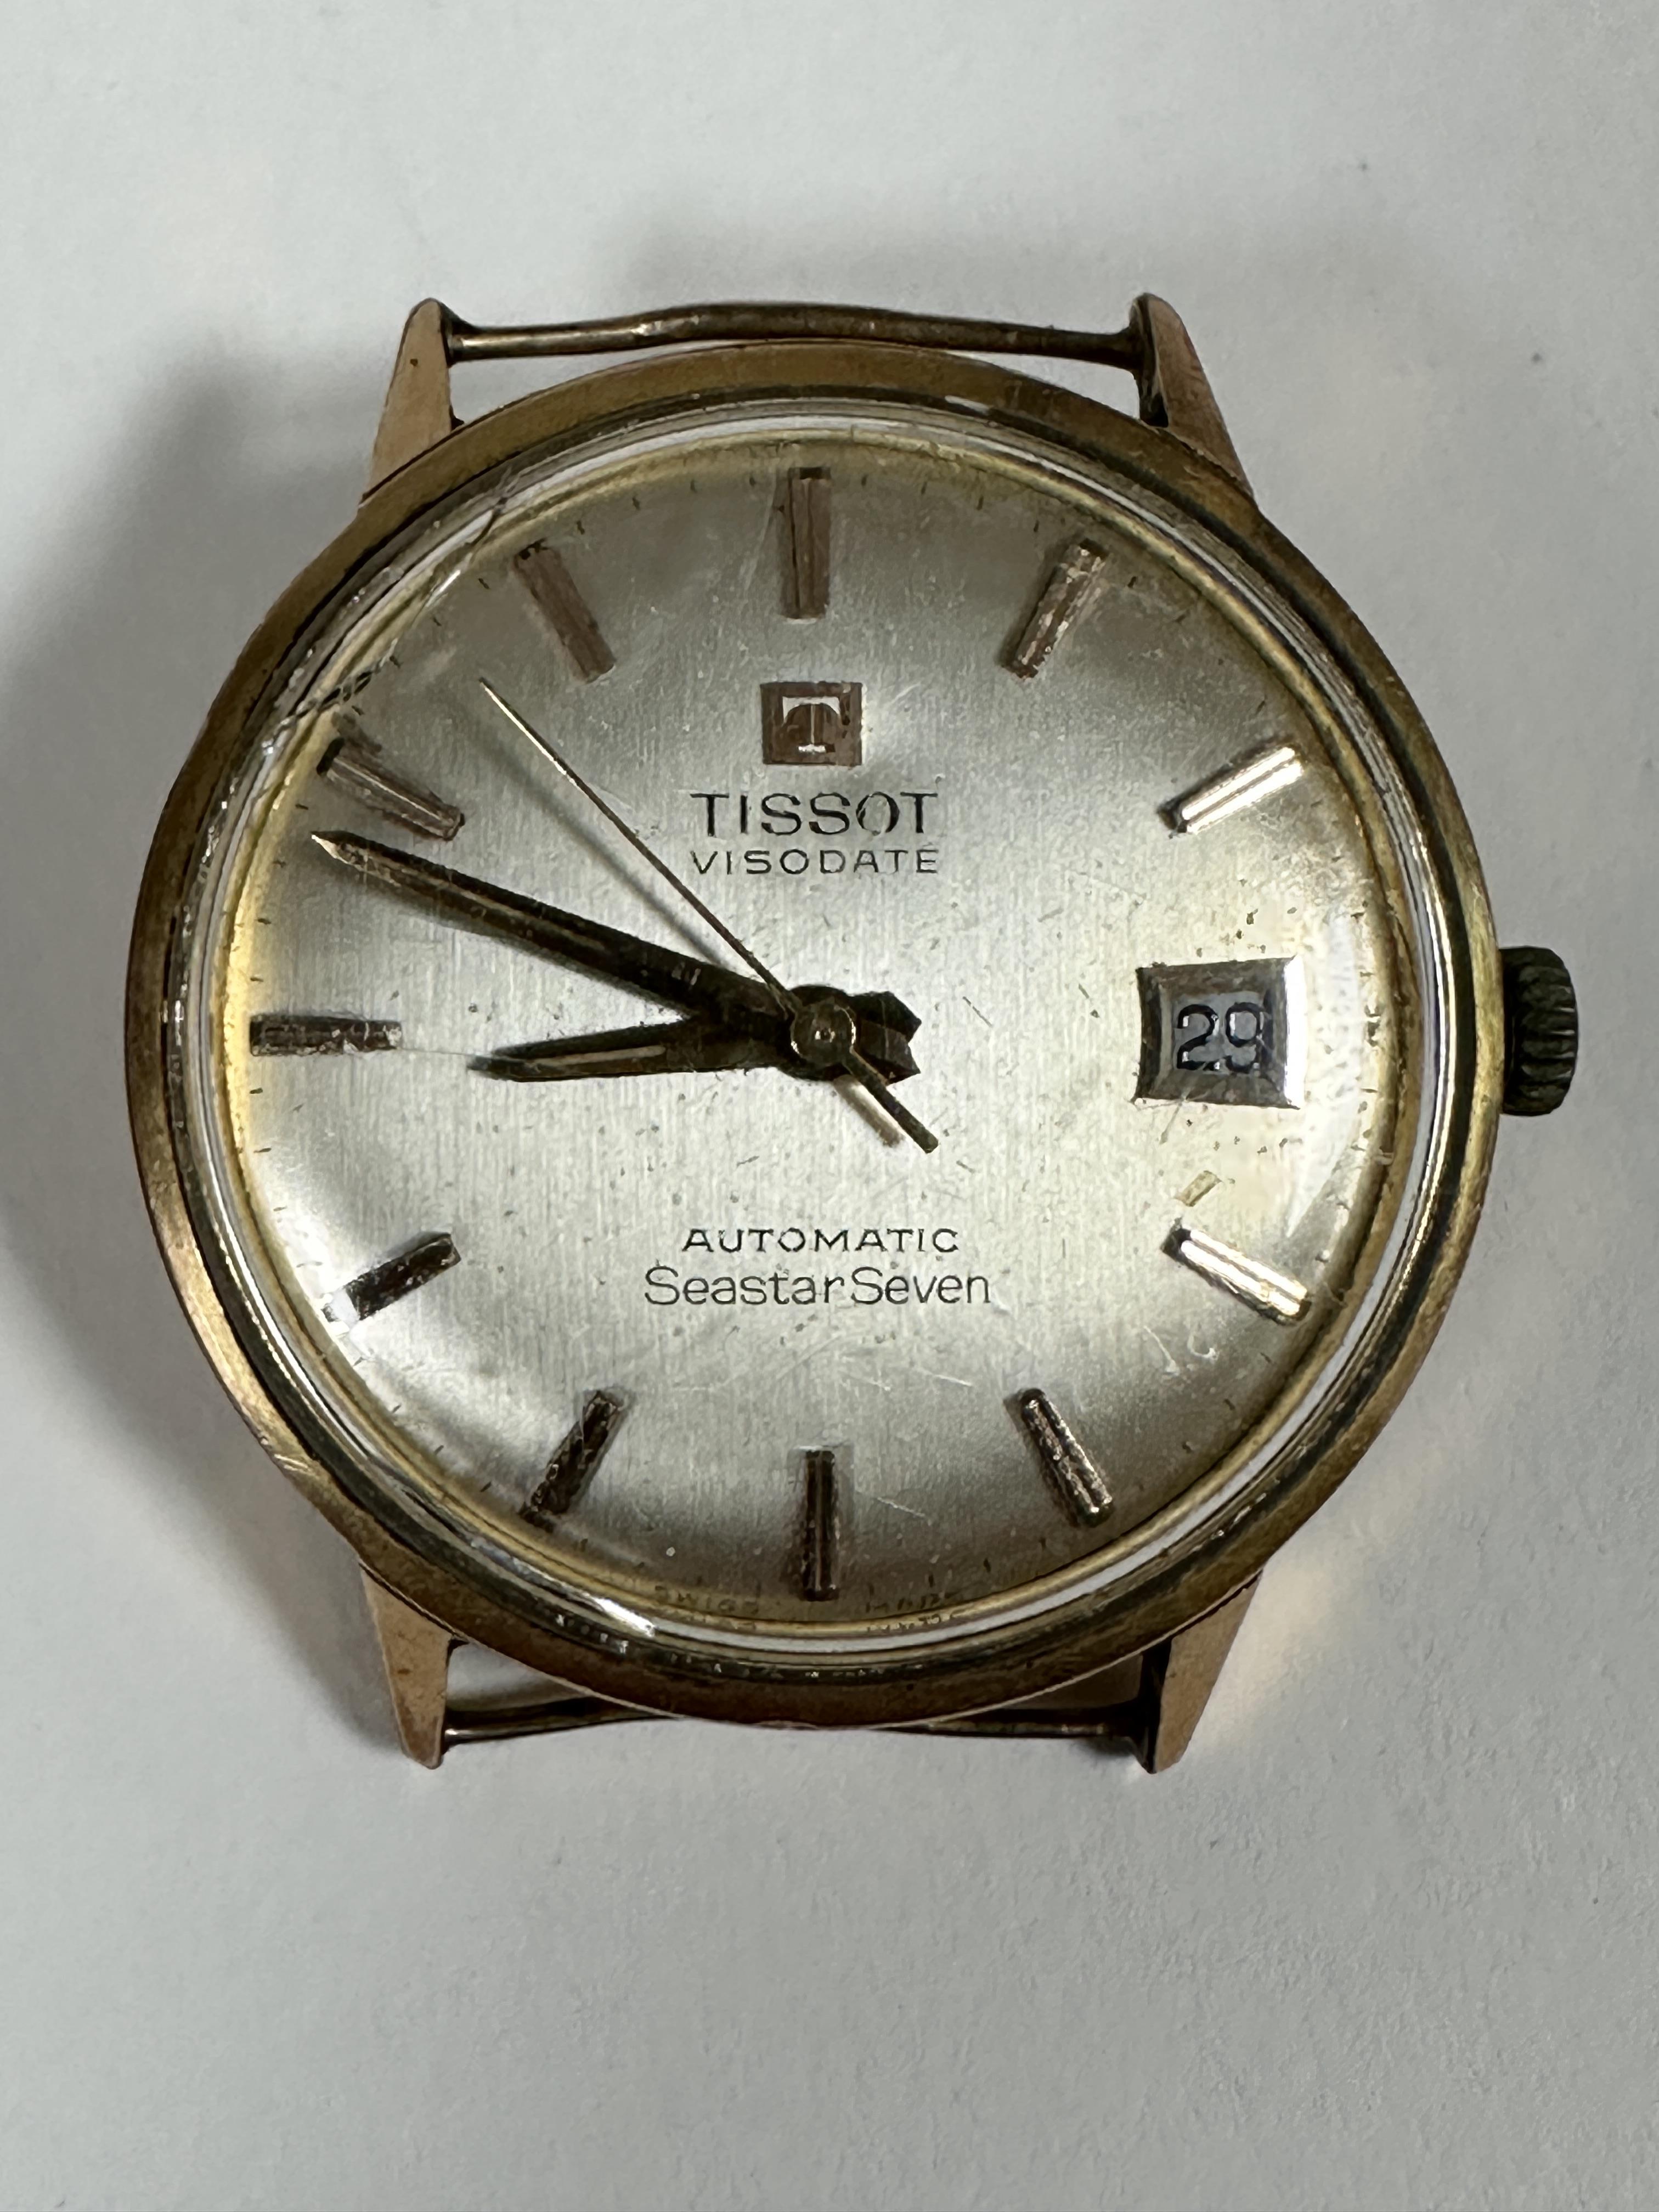 A gentleman's Tissot yellow metal Bisodate automatic SeaStar 7 vintage wristwatch with baton hour